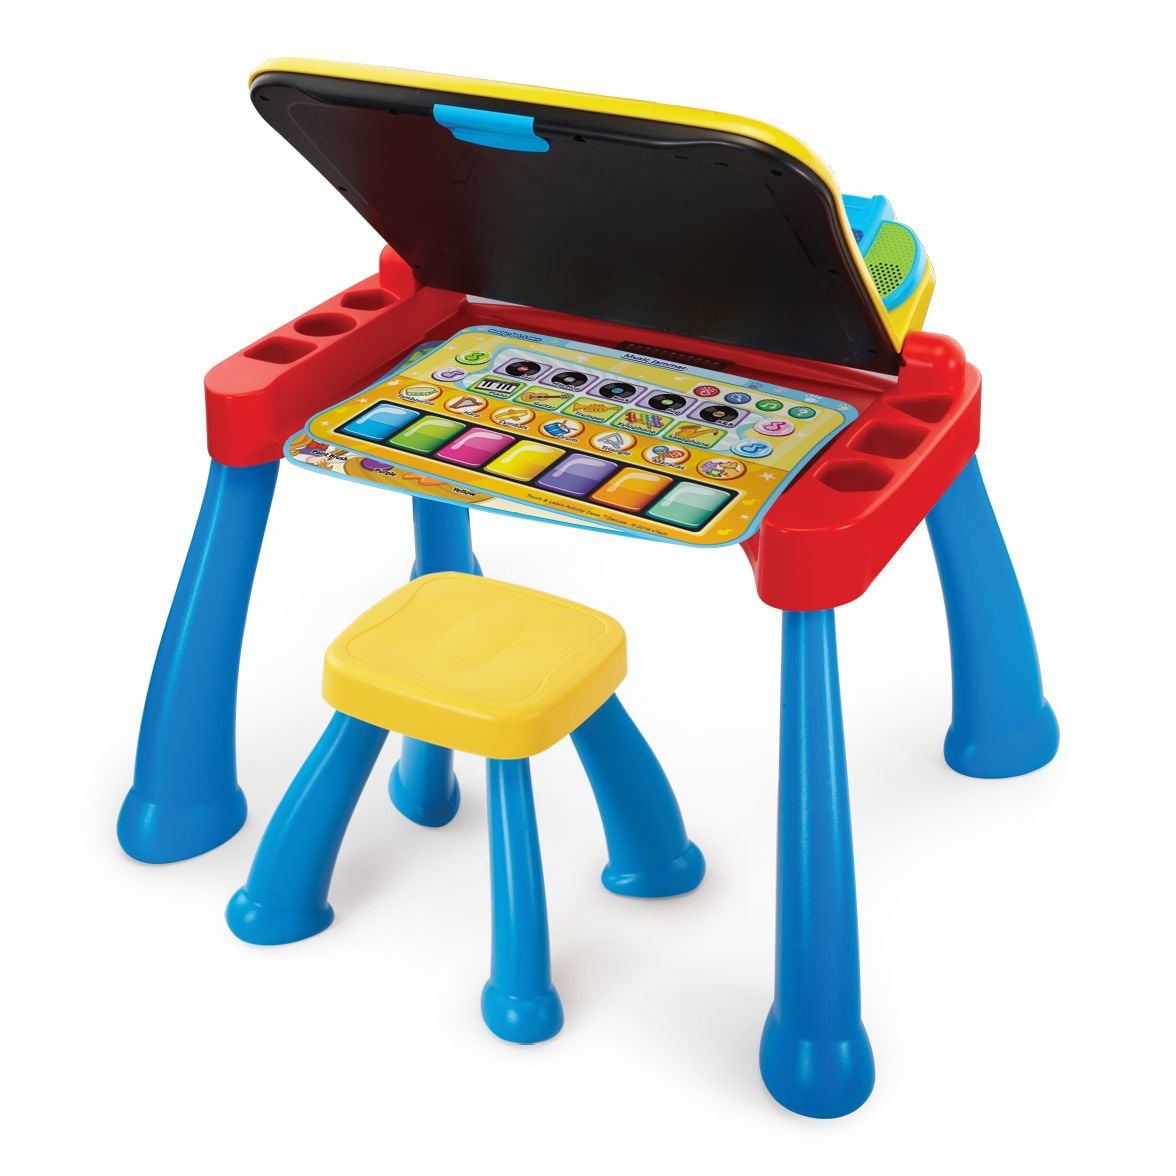 Vtech Touch & Learn Activity Desk 80-194800 for sale online